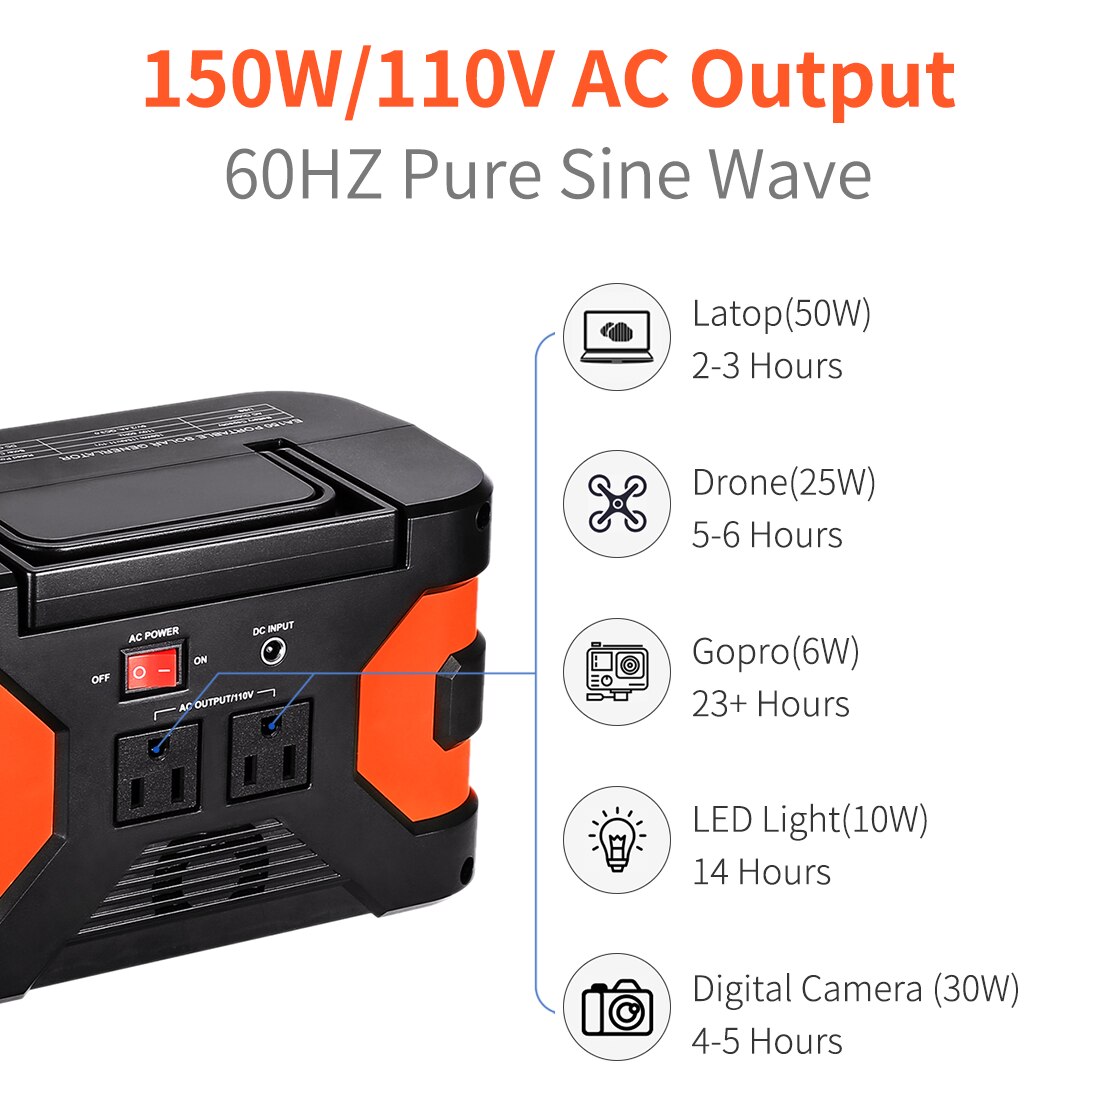 Power Station 81000mAh 110V AC Pure Sine wave 150W 330W Lithium Battery Pack CPAP 300Wh Solar Generator Emergency Power Supply